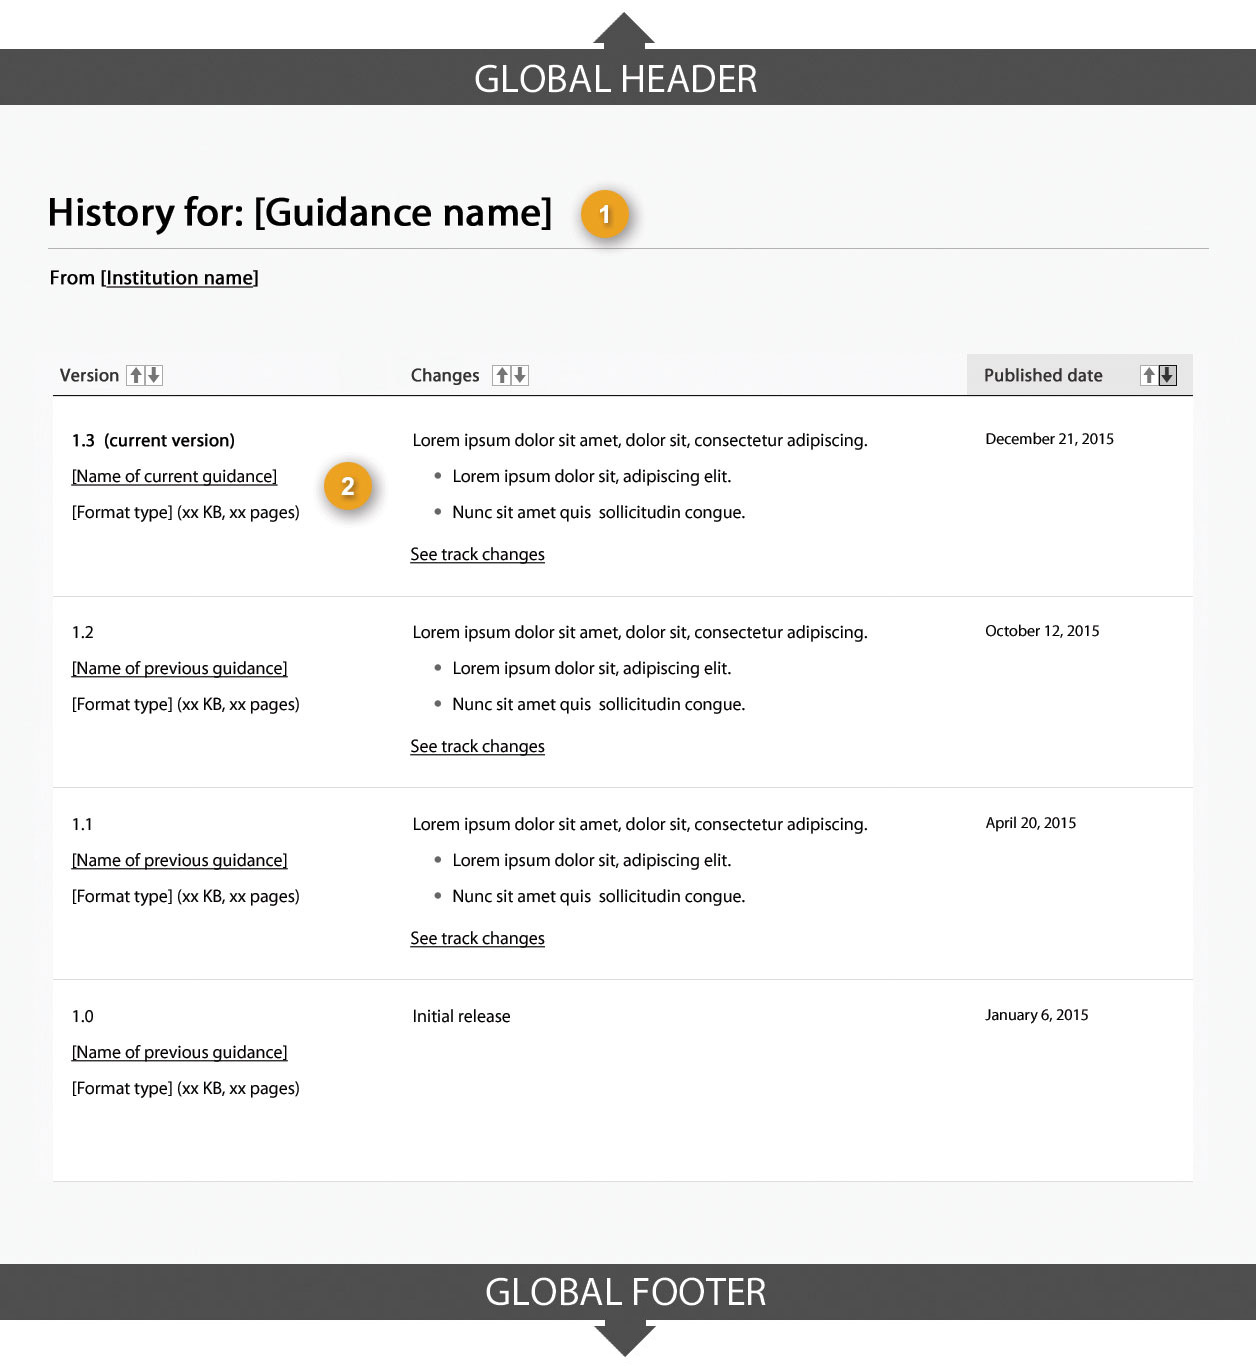 Template of guidance history page showing sections that make up its structure. Read top to bottom and left to right. Specifications detailed below.